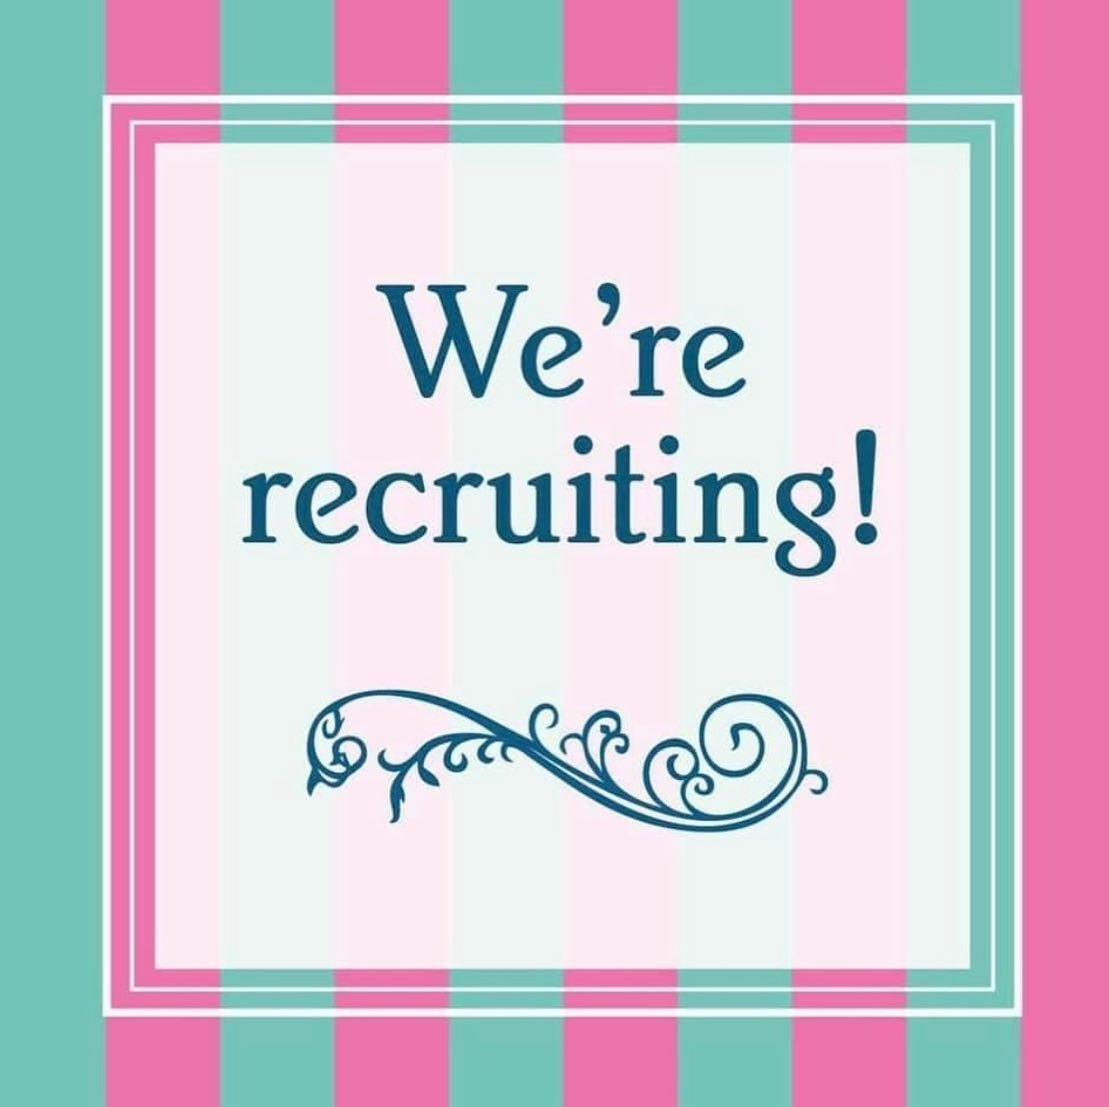 We&rsquo;re looking for enthusiastic individuals to join our ever growing team. Full or part time Beauty therapists/nail technicians t.789000 e.enquiries@thebeautyhouse.co.uk